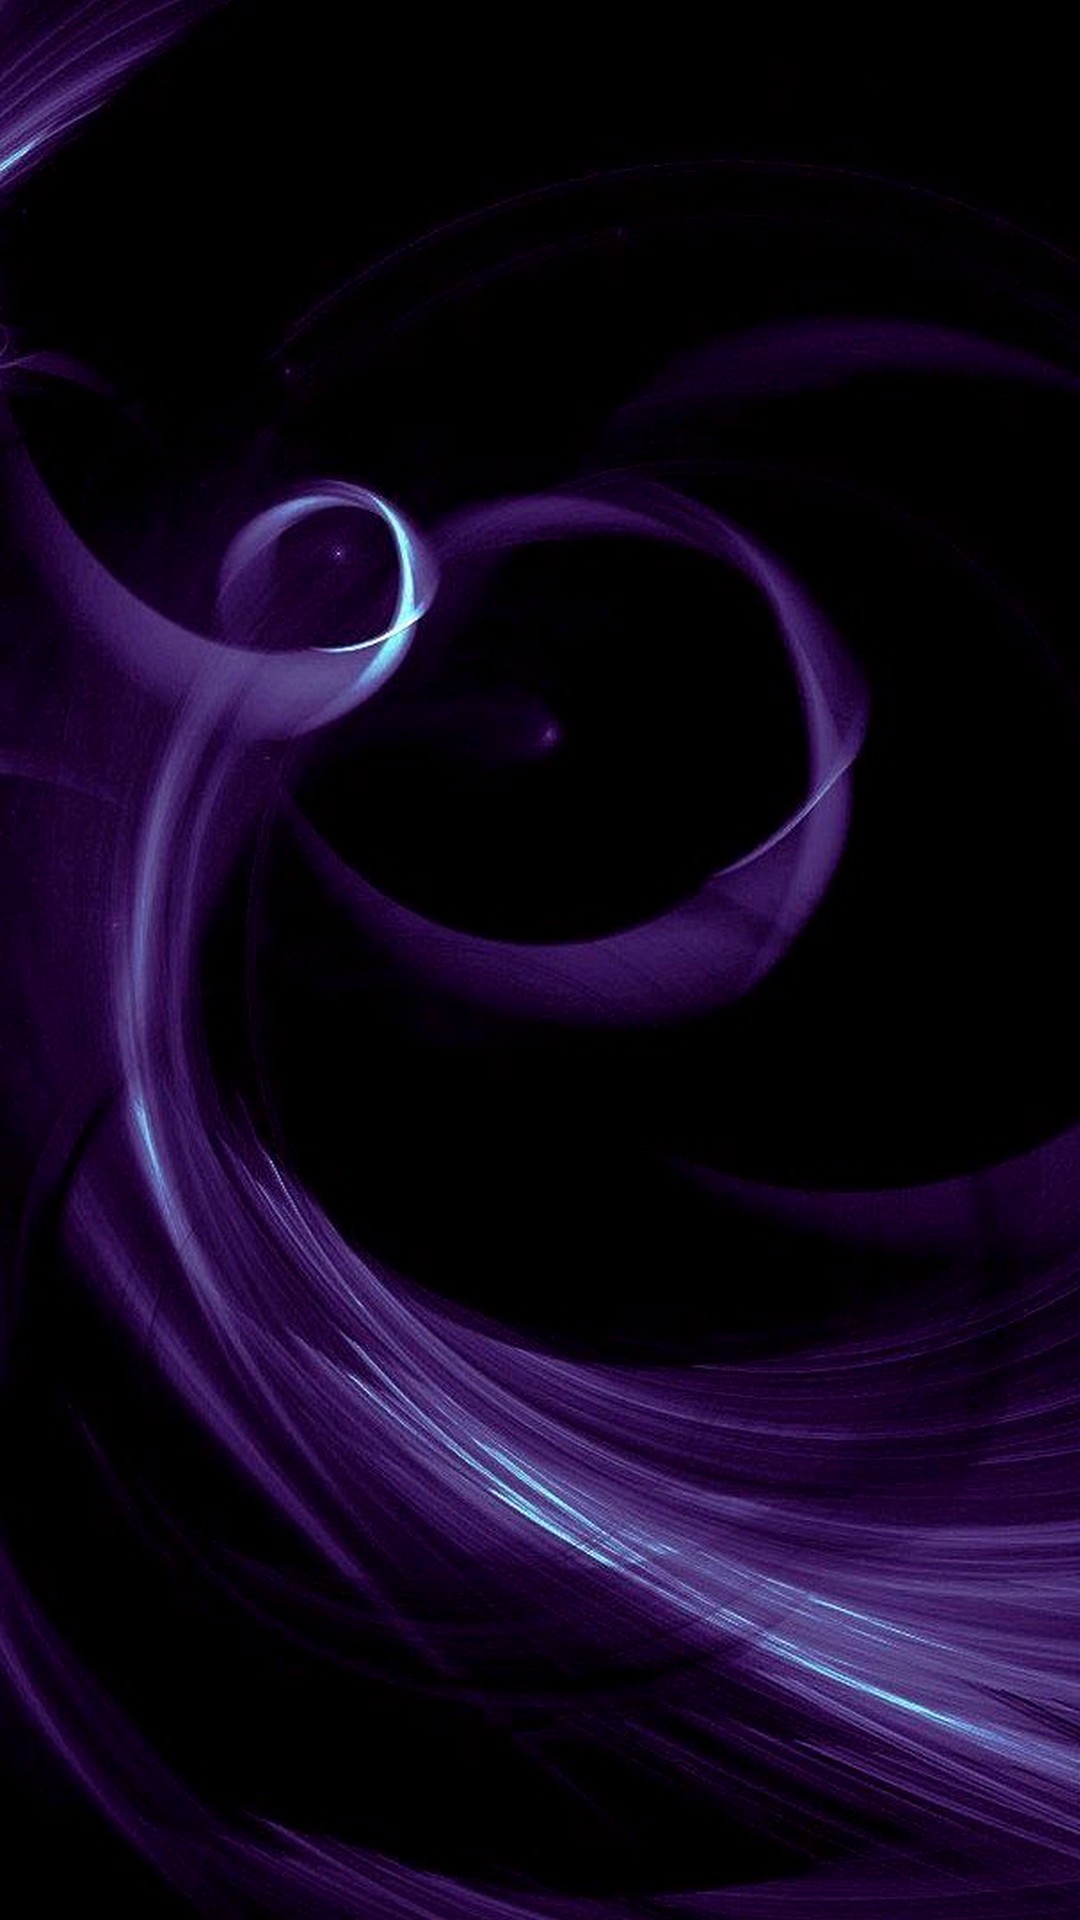 Purple i Phones Wallpaper with high-resolution 1080x1920 pixel. Download all Mobile Wallpapers and Use them as wallpapers for your iPhone, Tablet, iPad, Android and other mobile devices